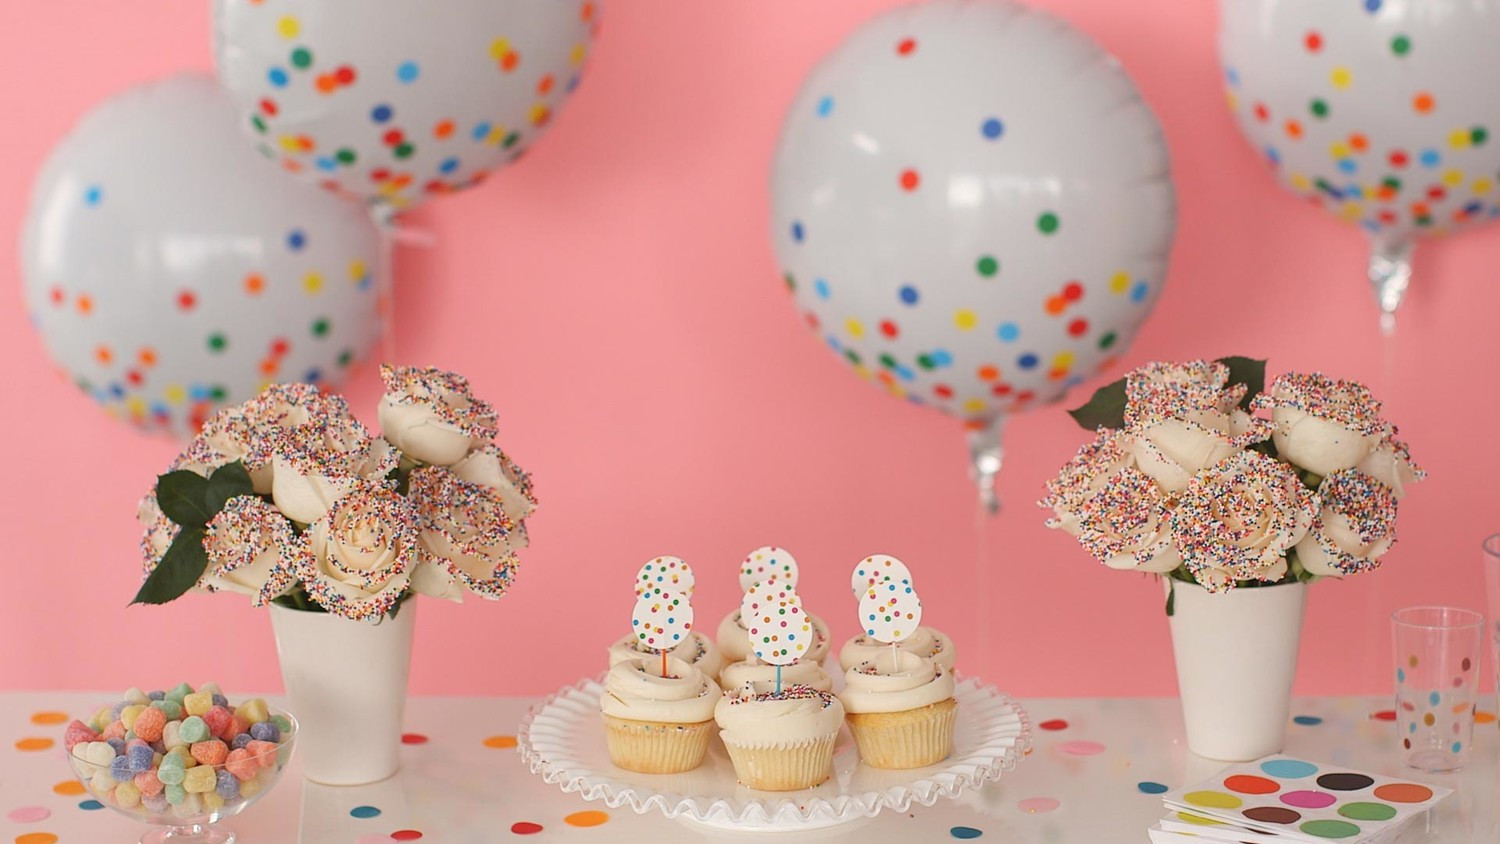 Baby Sprinkle Decoration Ideas
 How to Throw the Sweetest Baby Sprinkle Party